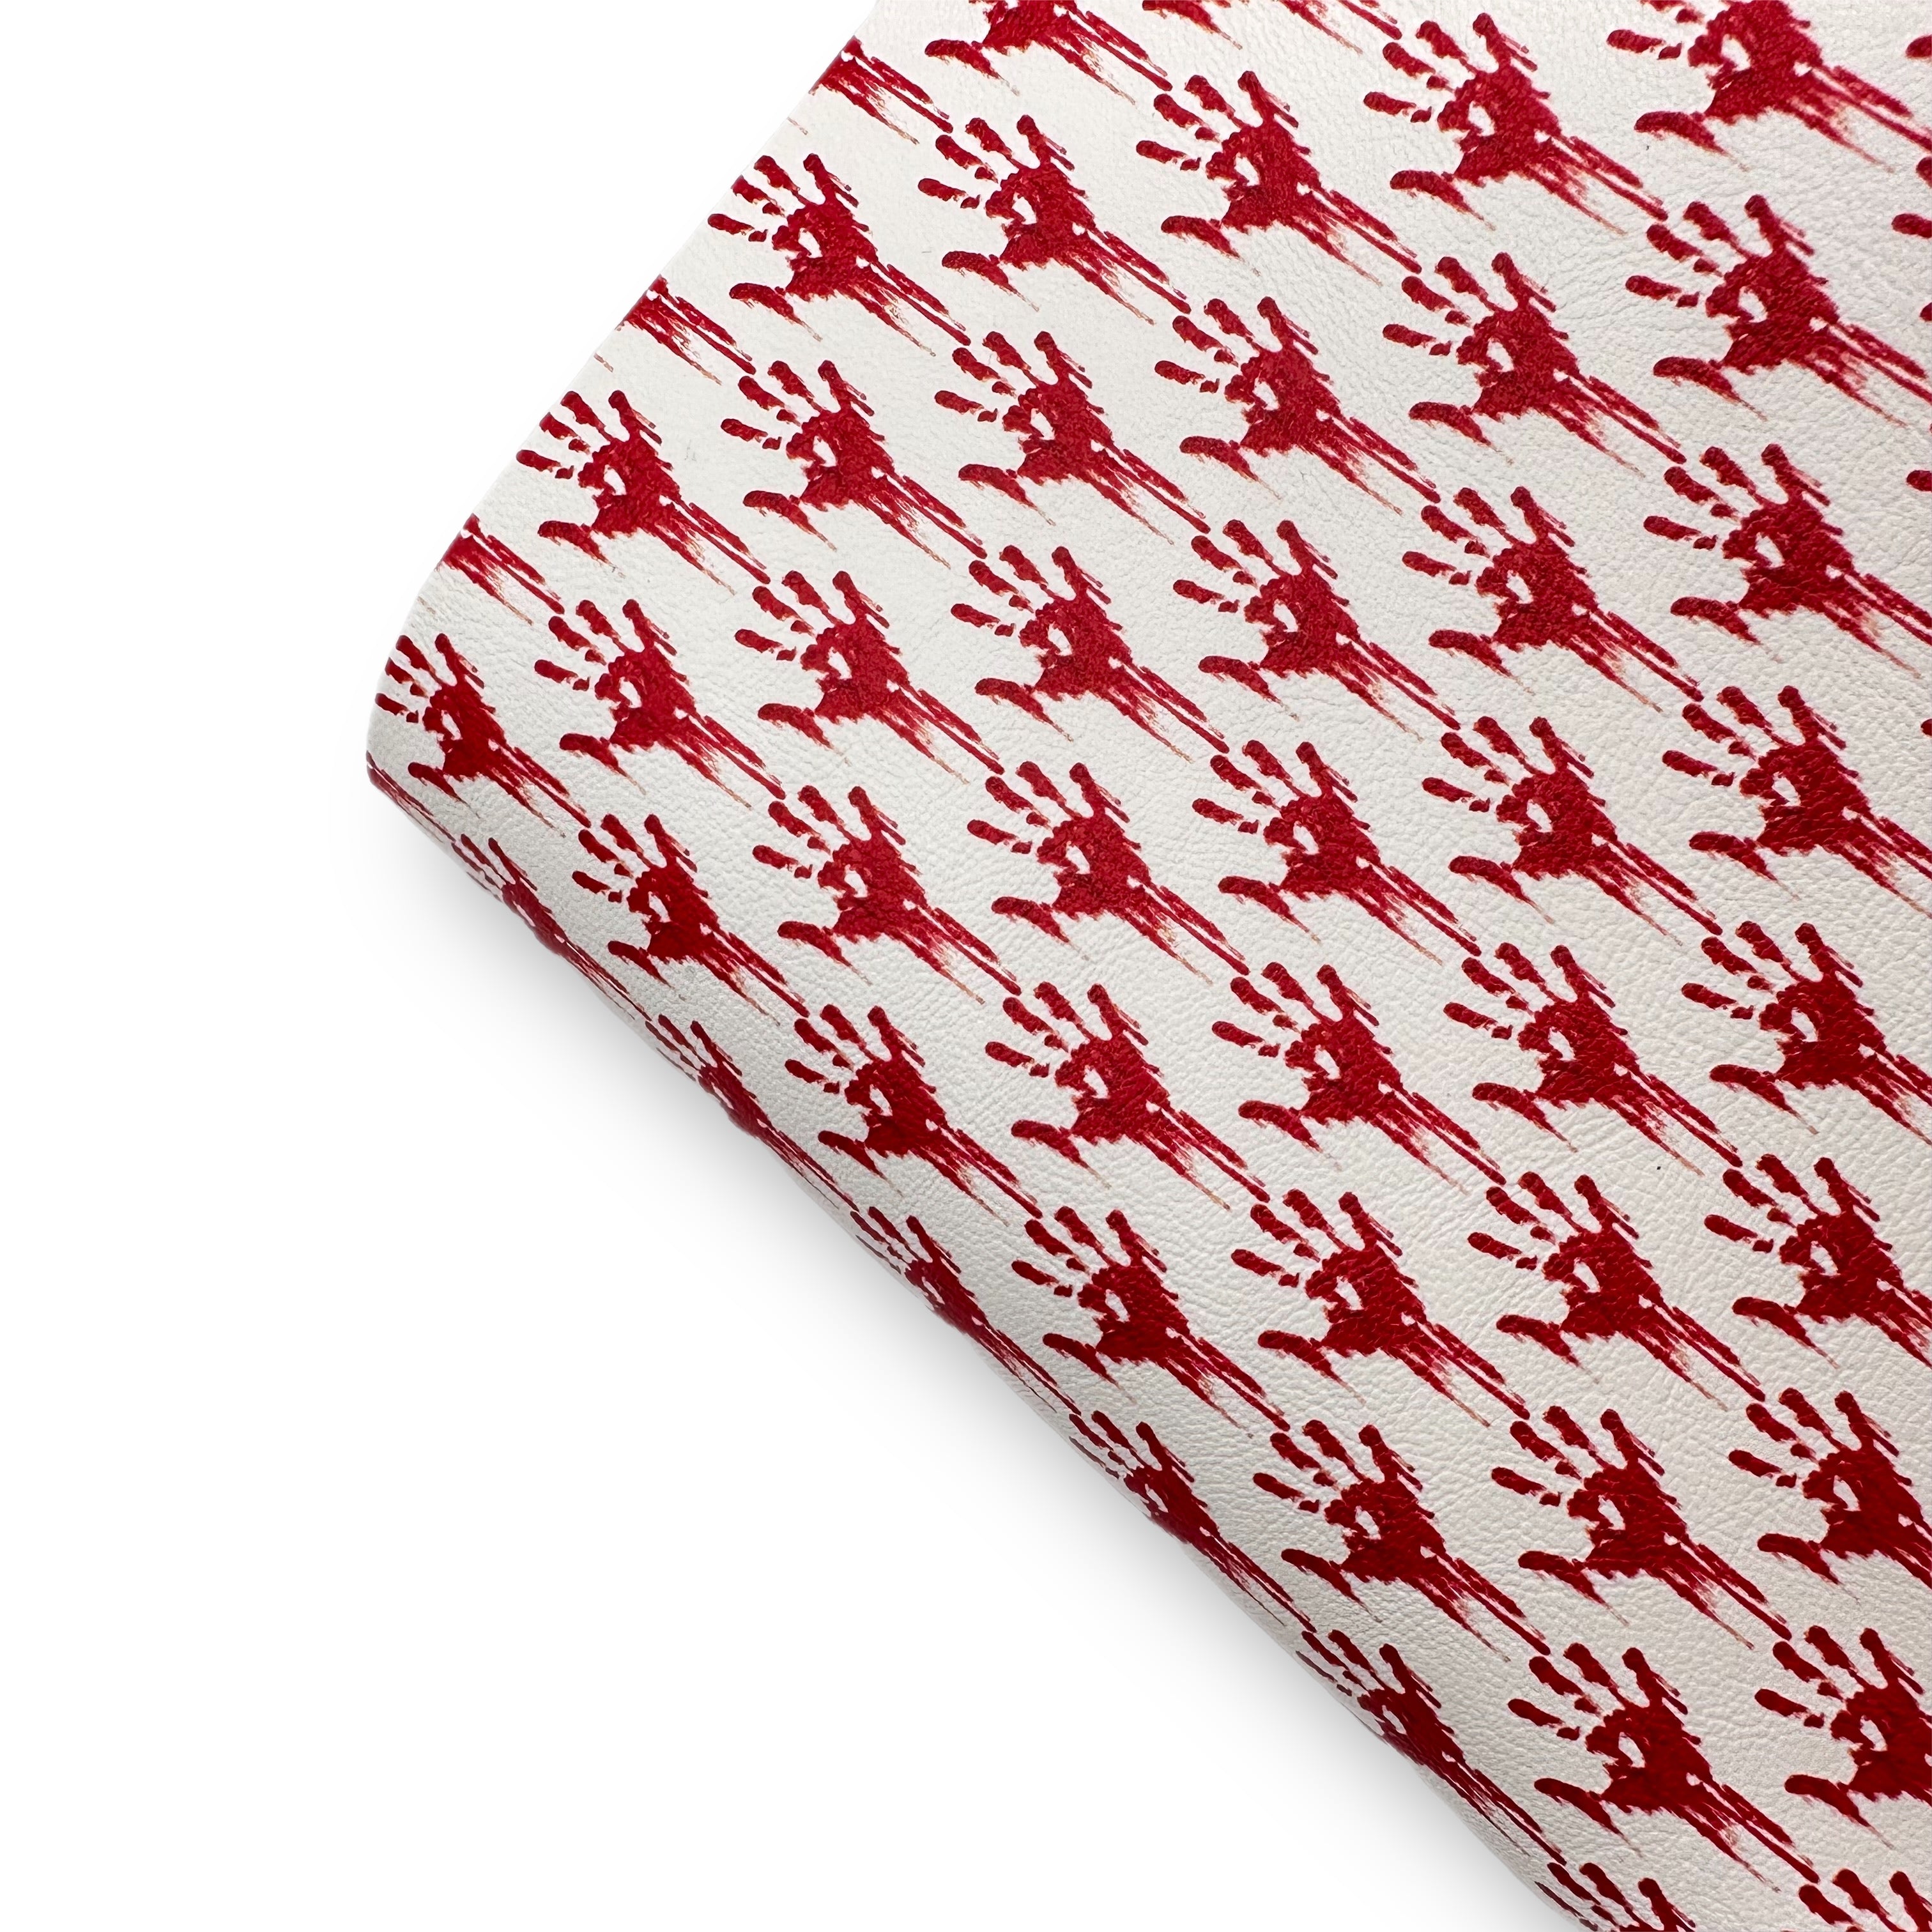 Bloody Hands Premium Faux Leather Fabric Sheets